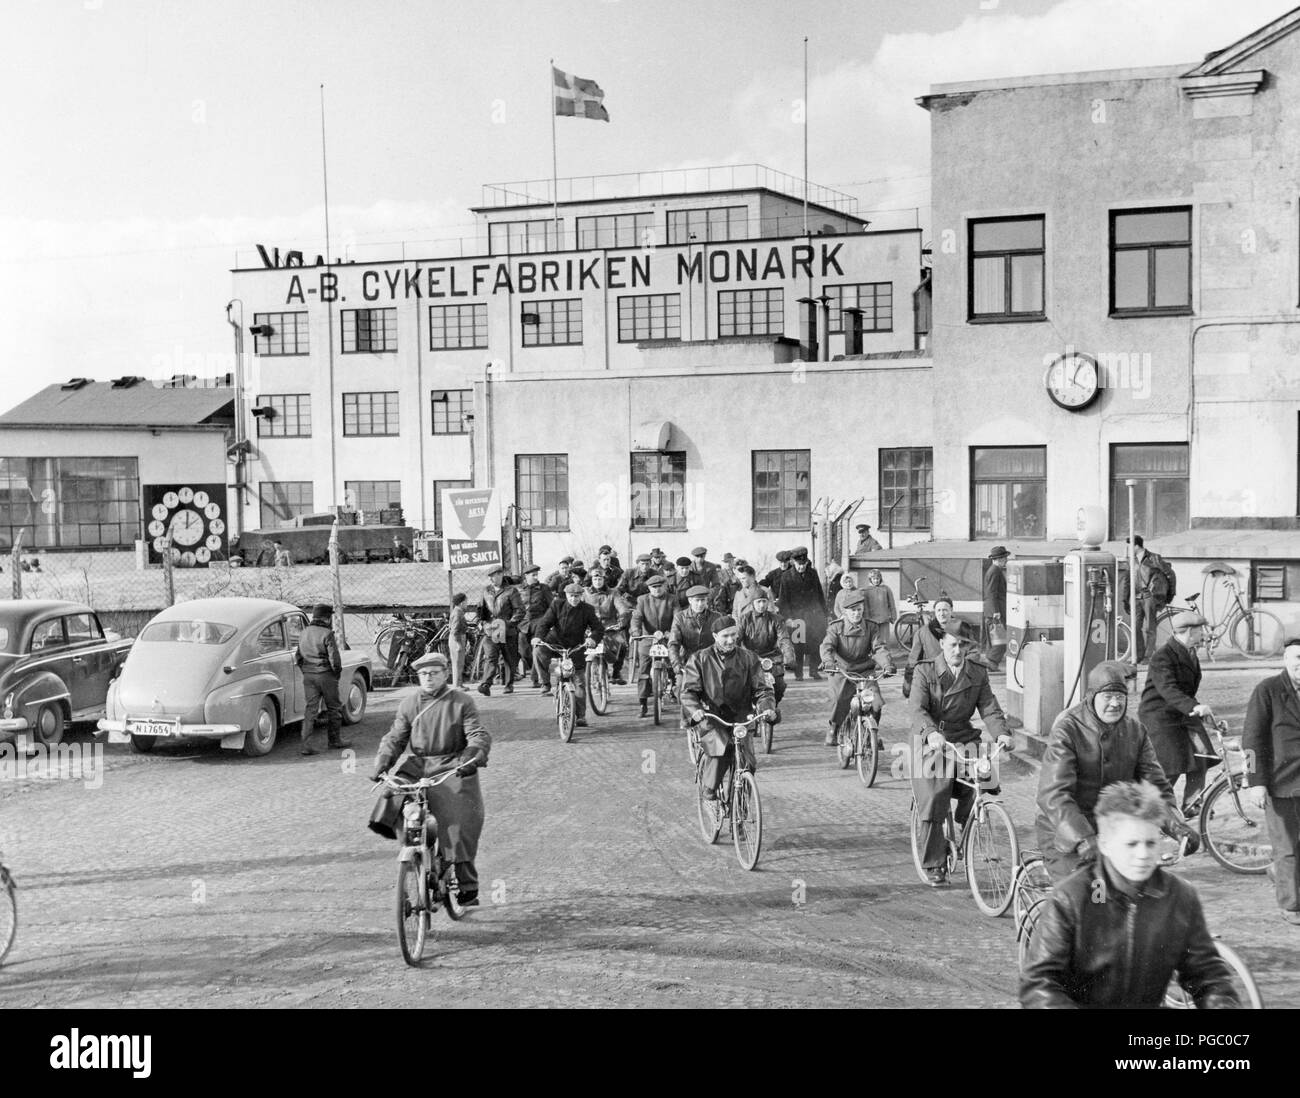 Factory in the 1950s. Work is over for the day at the bicycle and motorcycle company Monark in Sweden. The workers are leaving the factory building on their bicycles and mopeds. Sweden 1958 Stock Photo